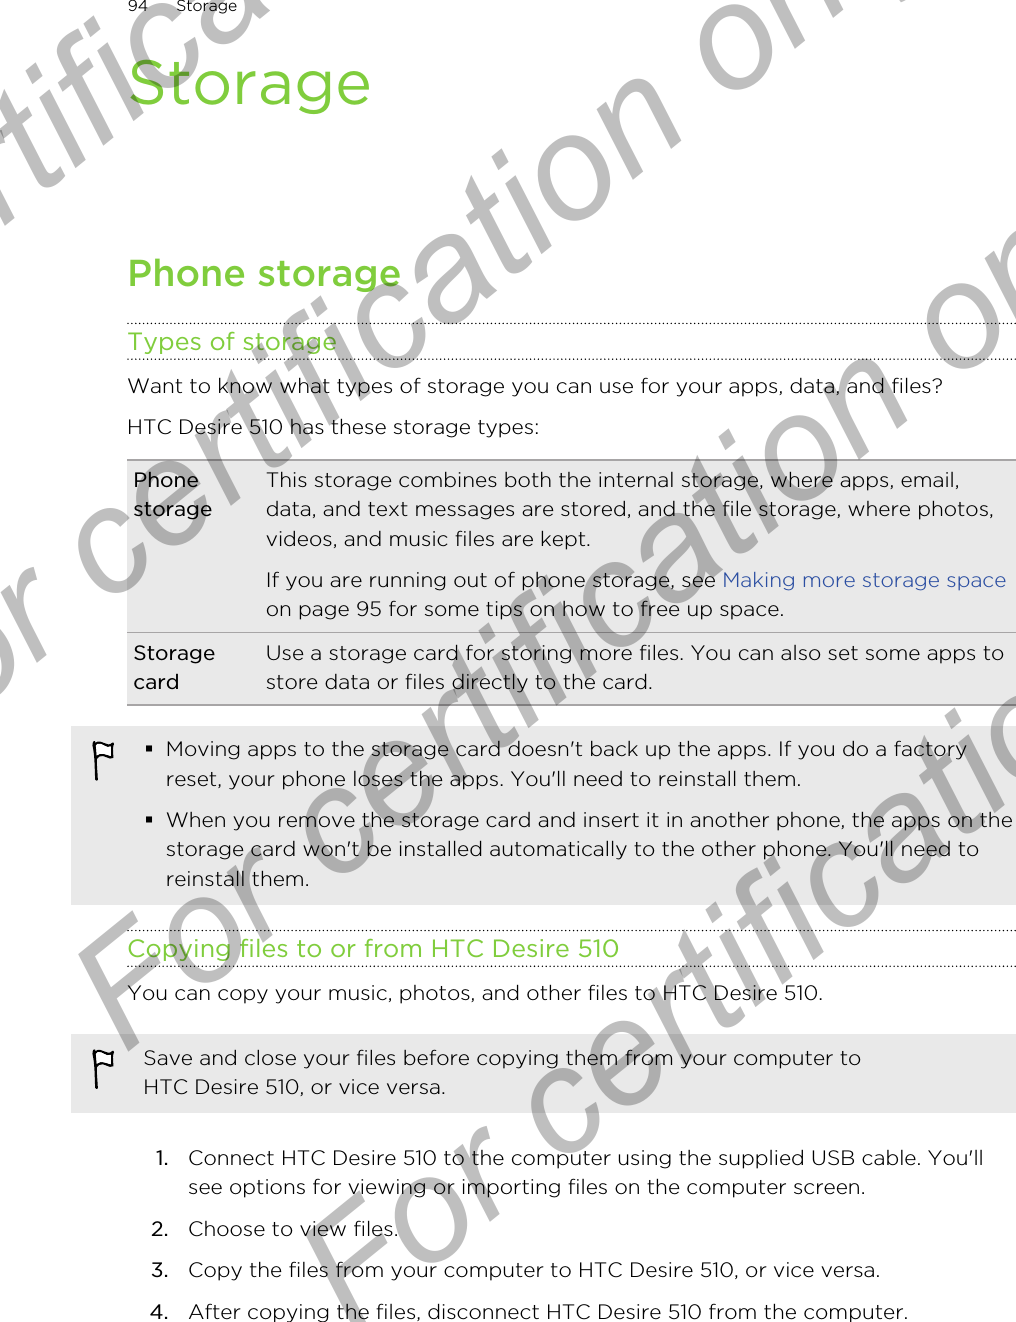 StoragePhone storageTypes of storageWant to know what types of storage you can use for your apps, data, and files?HTC Desire 510 has these storage types:PhonestorageThis storage combines both the internal storage, where apps, email,data, and text messages are stored, and the file storage, where photos,videos, and music files are kept.If you are running out of phone storage, see Making more storage spaceon page 95 for some tips on how to free up space.StoragecardUse a storage card for storing more files. You can also set some apps tostore data or files directly to the card.§Moving apps to the storage card doesn&apos;t back up the apps. If you do a factoryreset, your phone loses the apps. You&apos;ll need to reinstall them.§When you remove the storage card and insert it in another phone, the apps on thestorage card won&apos;t be installed automatically to the other phone. You&apos;ll need toreinstall them.Copying files to or from HTC Desire 510You can copy your music, photos, and other files to HTC Desire 510.Save and close your files before copying them from your computer toHTC Desire 510, or vice versa.1. Connect HTC Desire 510 to the computer using the supplied USB cable. You&apos;llsee options for viewing or importing files on the computer screen.2. Choose to view files.3. Copy the files from your computer to HTC Desire 510, or vice versa.4. After copying the files, disconnect HTC Desire 510 from the computer.94 StorageFor certification  For certification only  For certification only  For certification only 